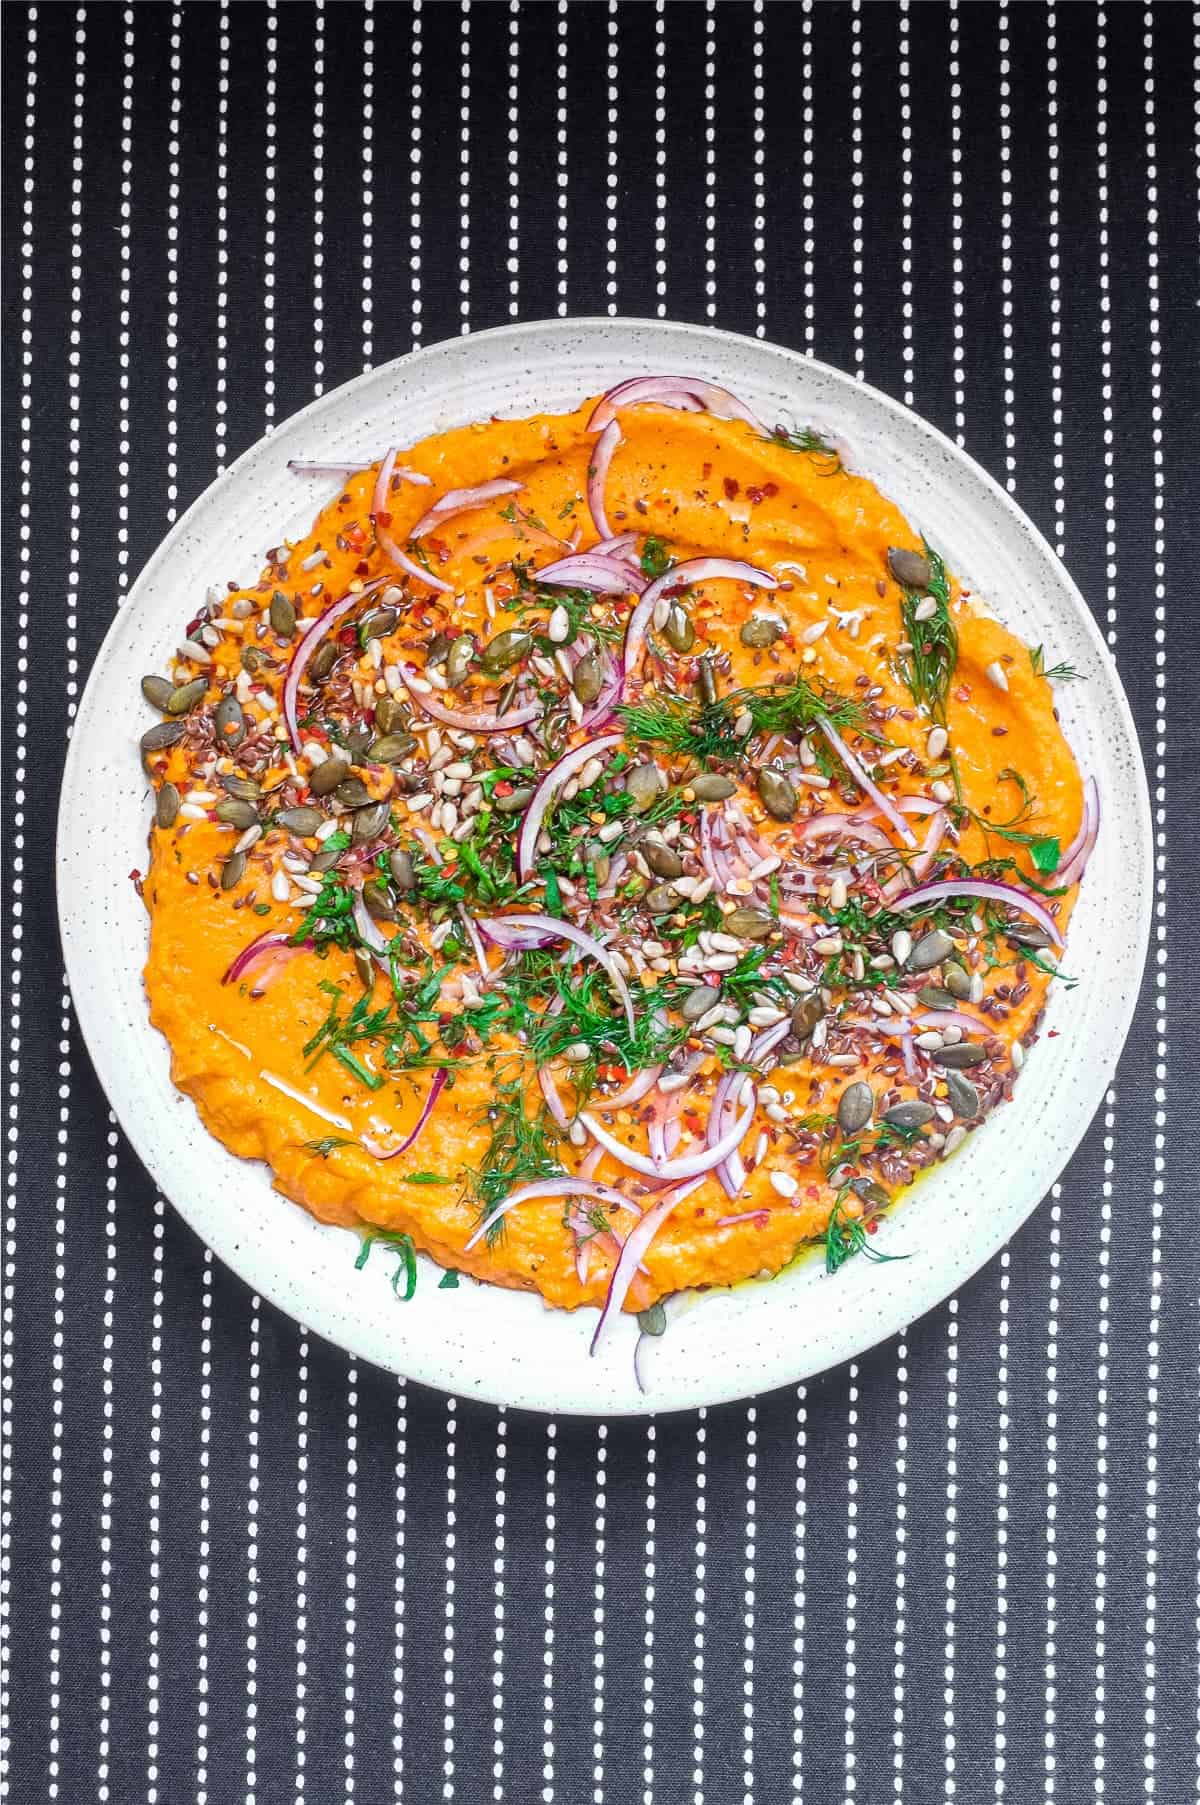 A platter of Turkish carrot salad scattered with herbs, seeds and red onion